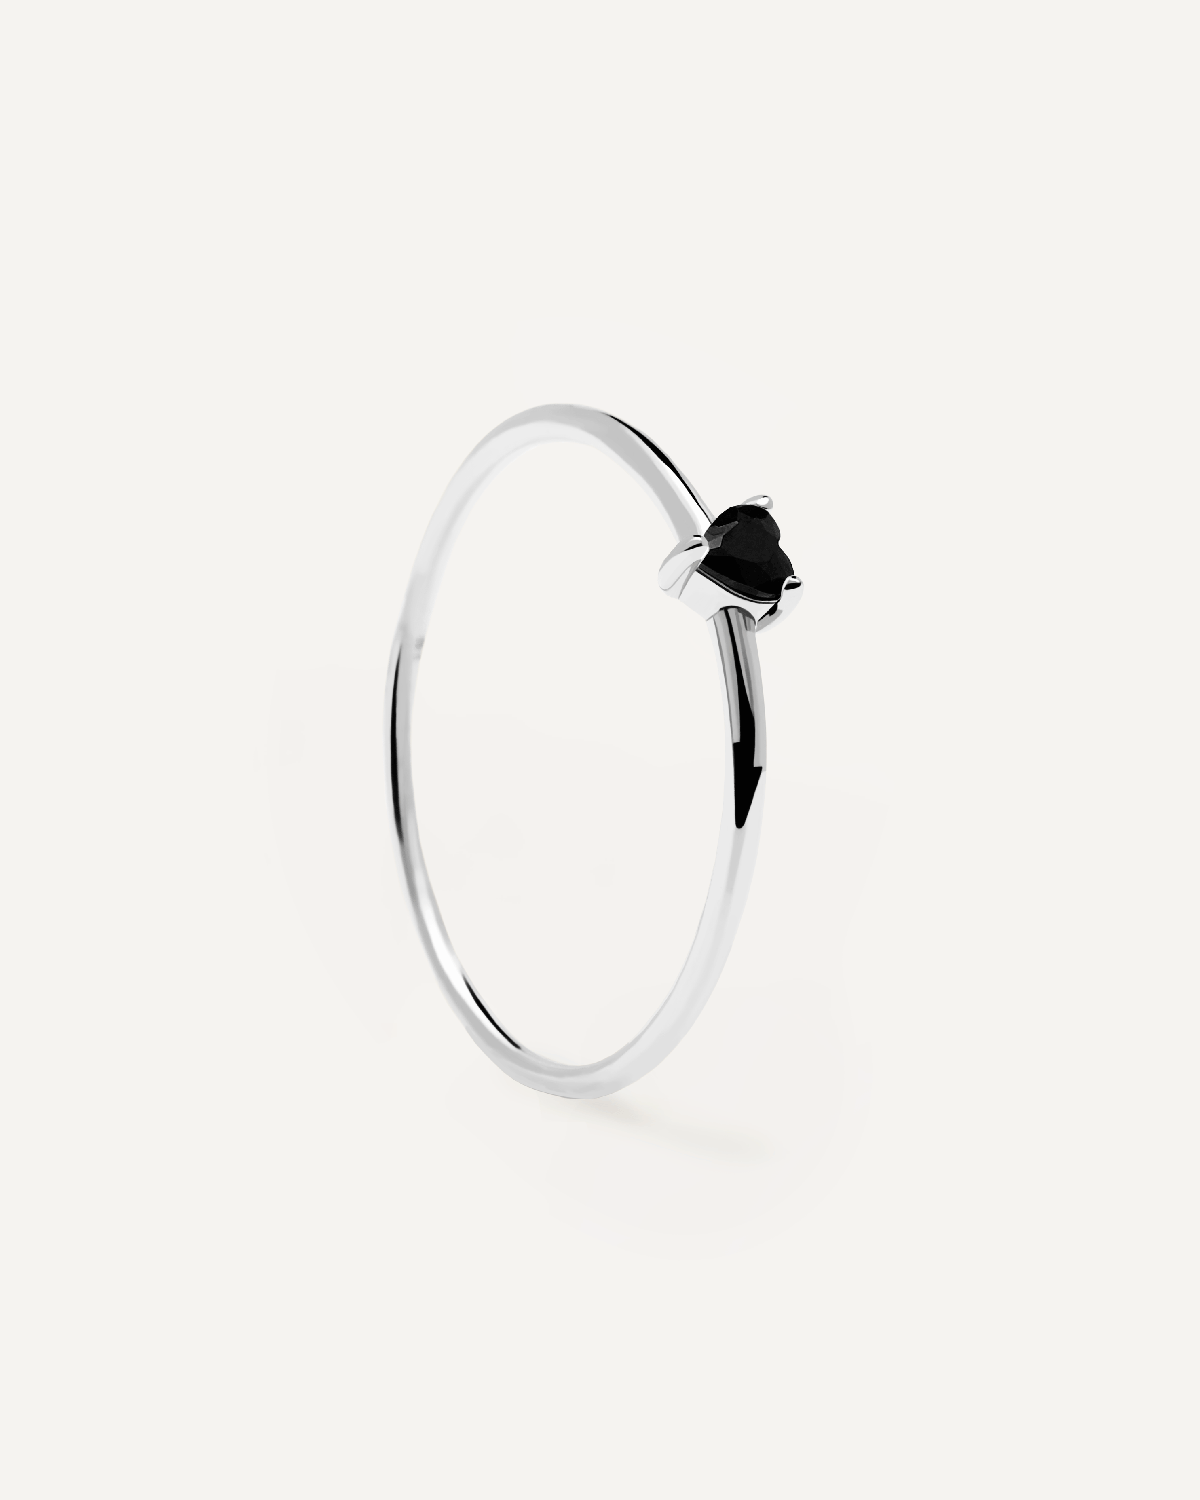 2023 Selection | Black Heart Ring Silver. Heart-shaped black zirconia stone prong-set on a thin 925 sterling silver ring. Get the latest arrival from PDPAOLA. Place your order safely and get this Best Seller. Free Shipping.